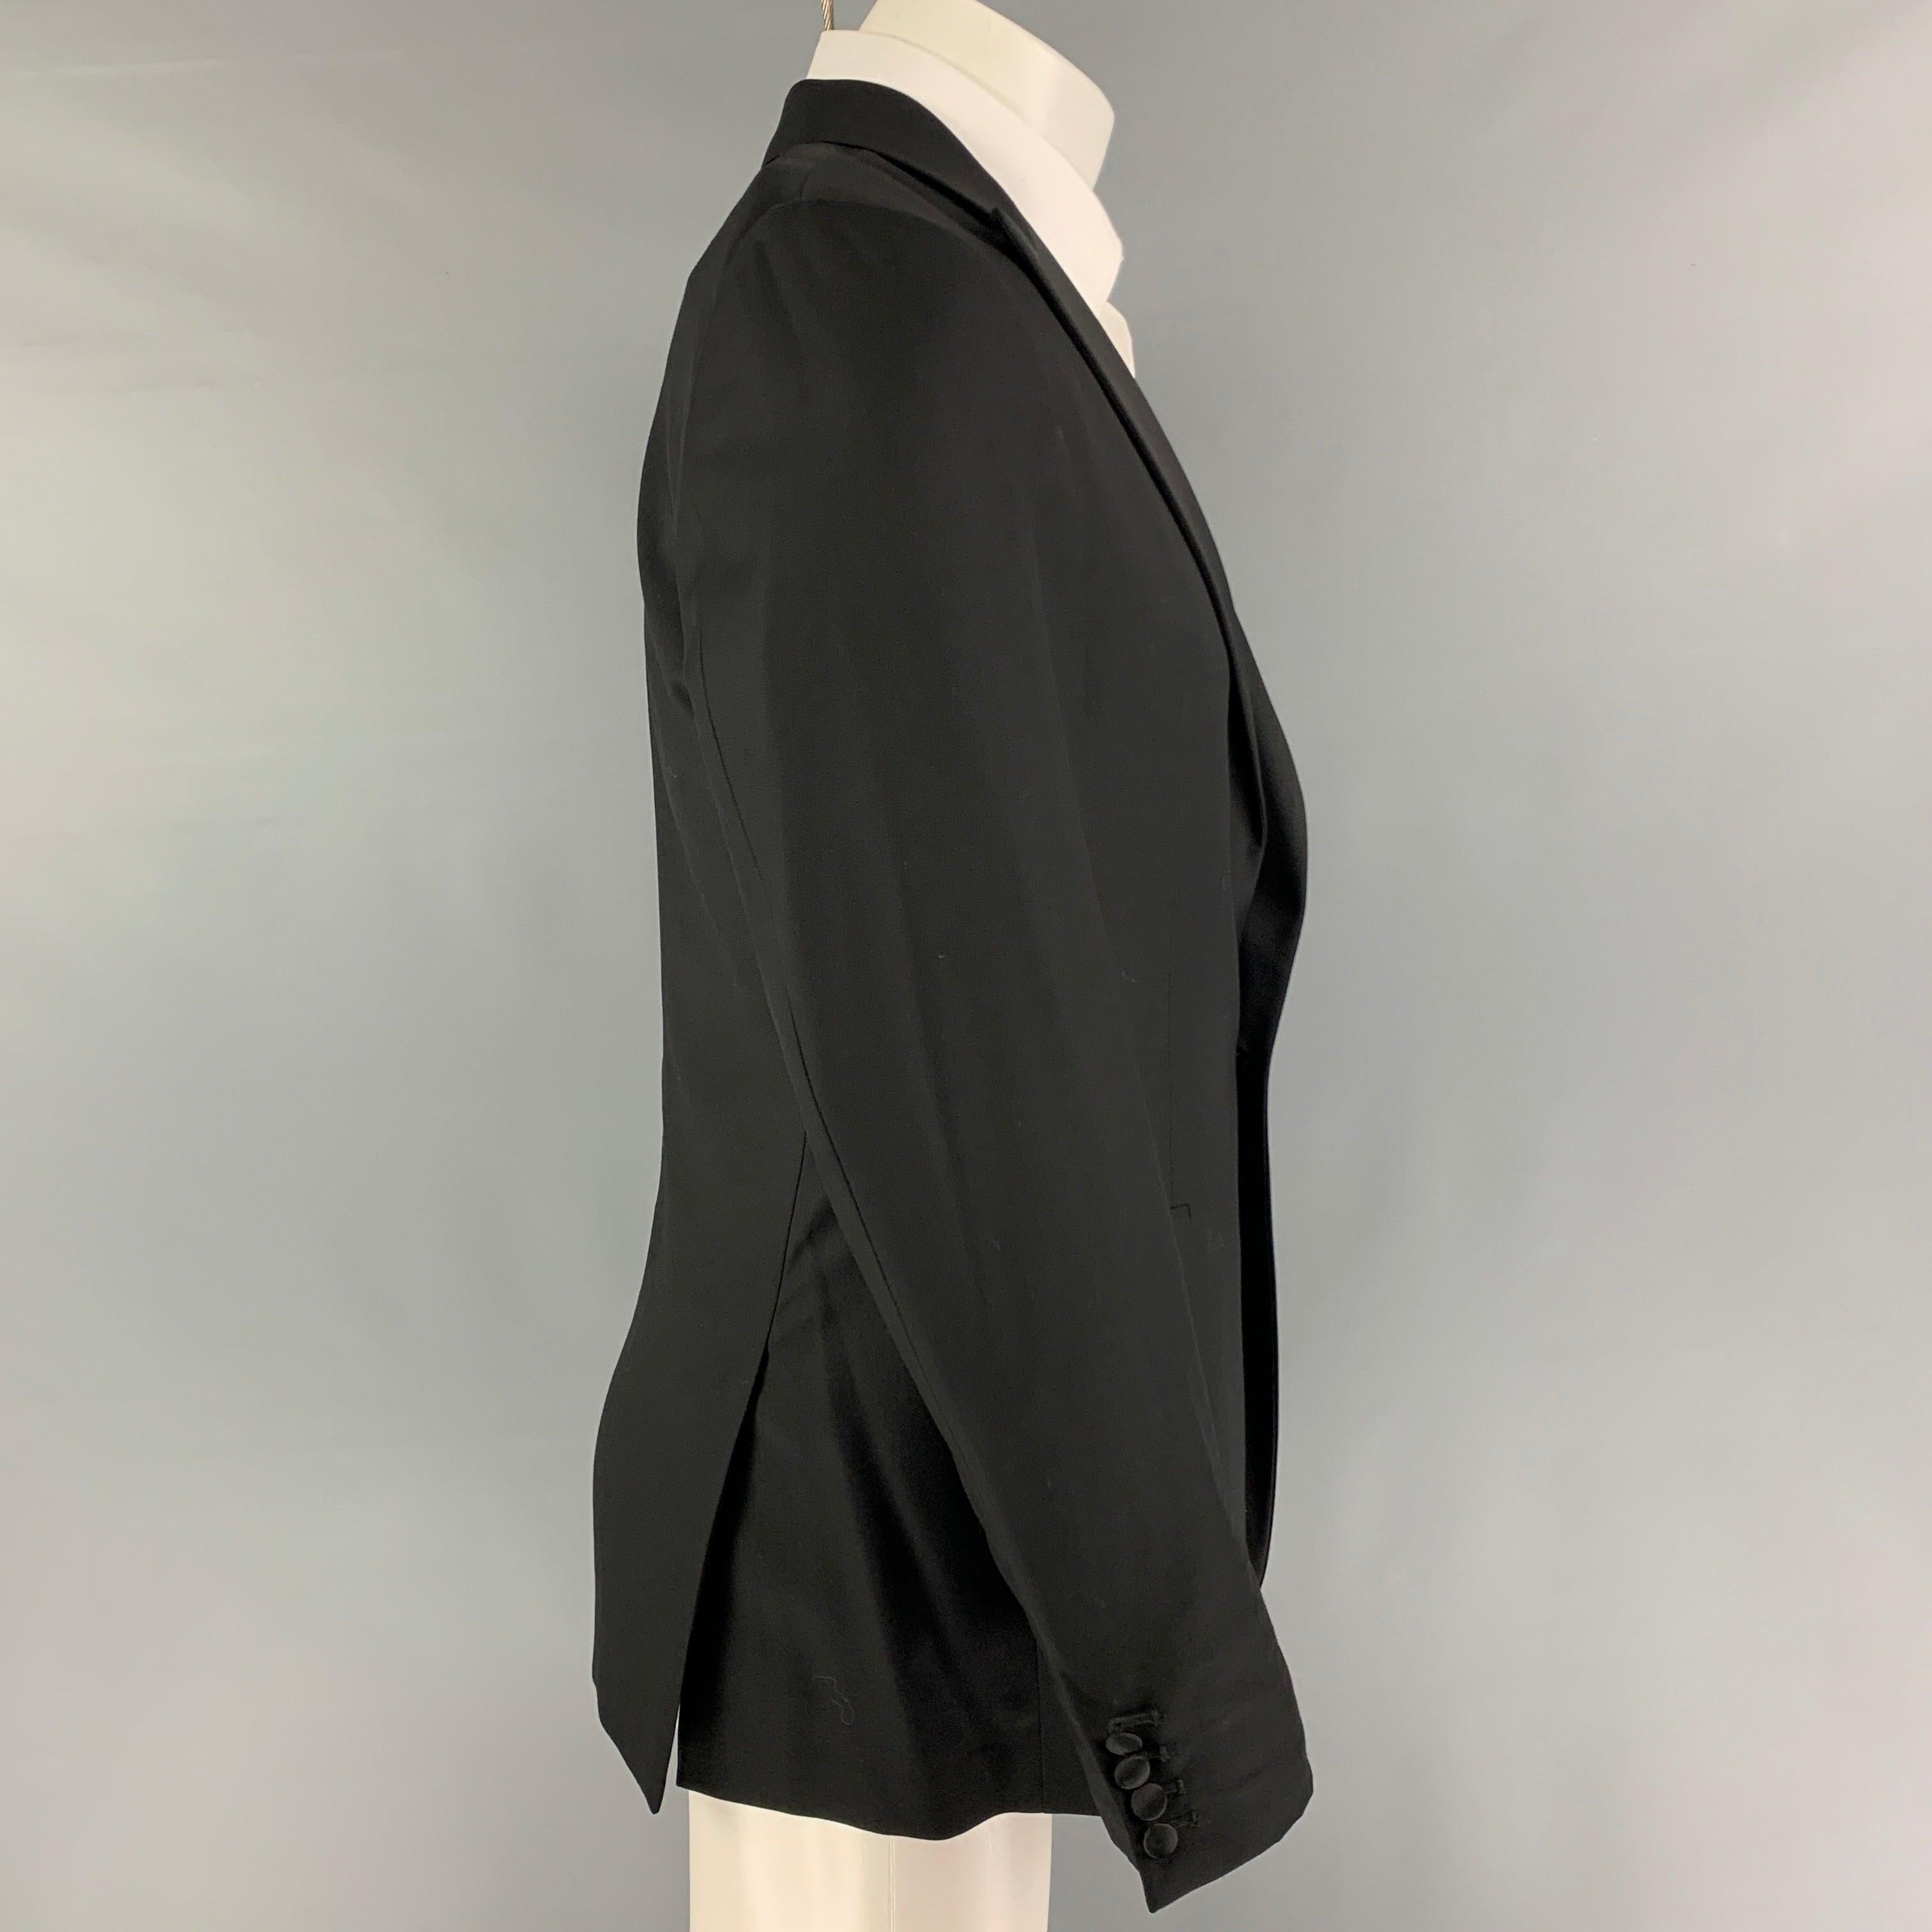 CALVIN KLEIN COLLECTION sport coat comes in a black wool with a full liner featuring a peak lapel, flap pockets, double back vent, and a single button closure.
Very Good
Pre-Owned Condition. 

Marked:   48/38 

Measurements: 
 
Shoulder: 17 inches 